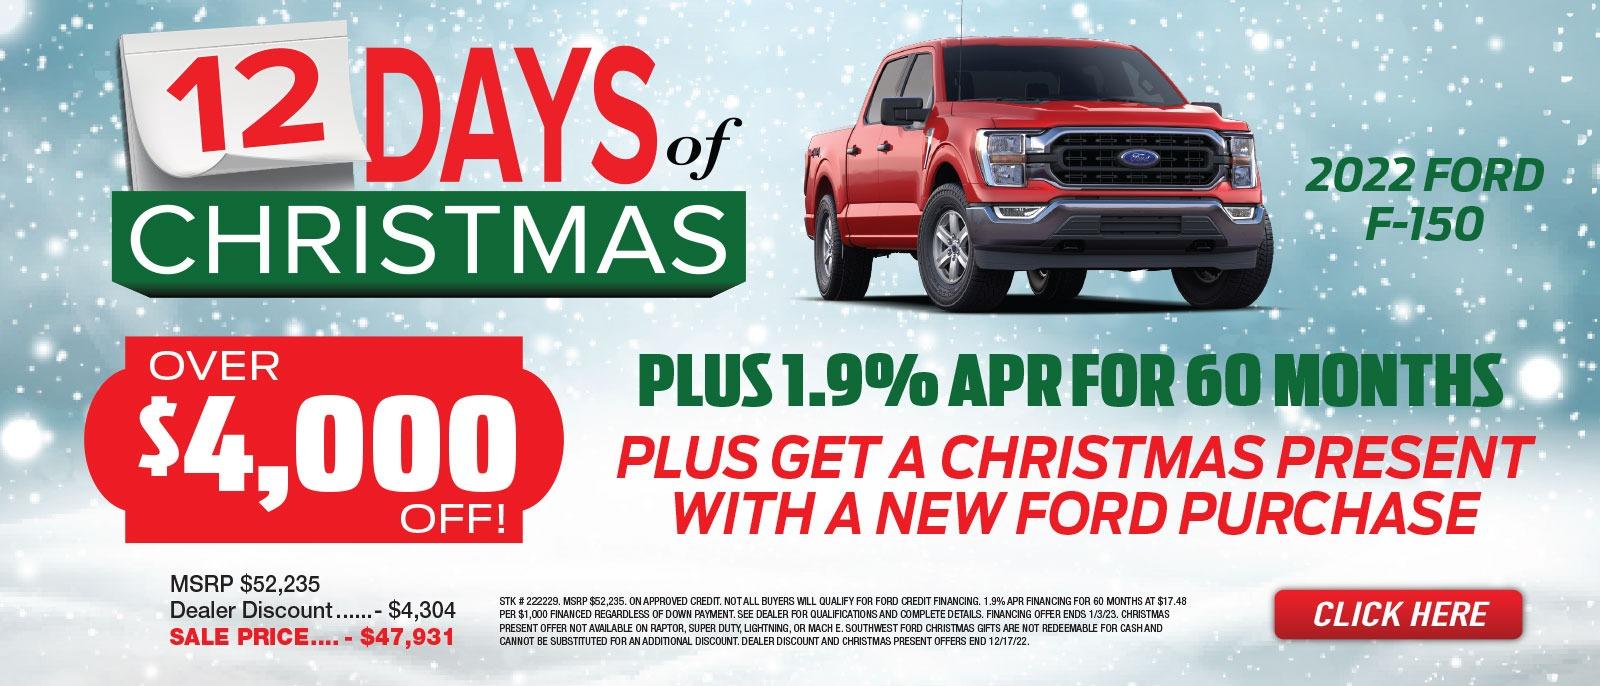 2022 Ford F-150 limited time!
Over $4,000 off! 
Plus 1.9% APR for 60 months
Plus get a Christmas present with a new ford purchase